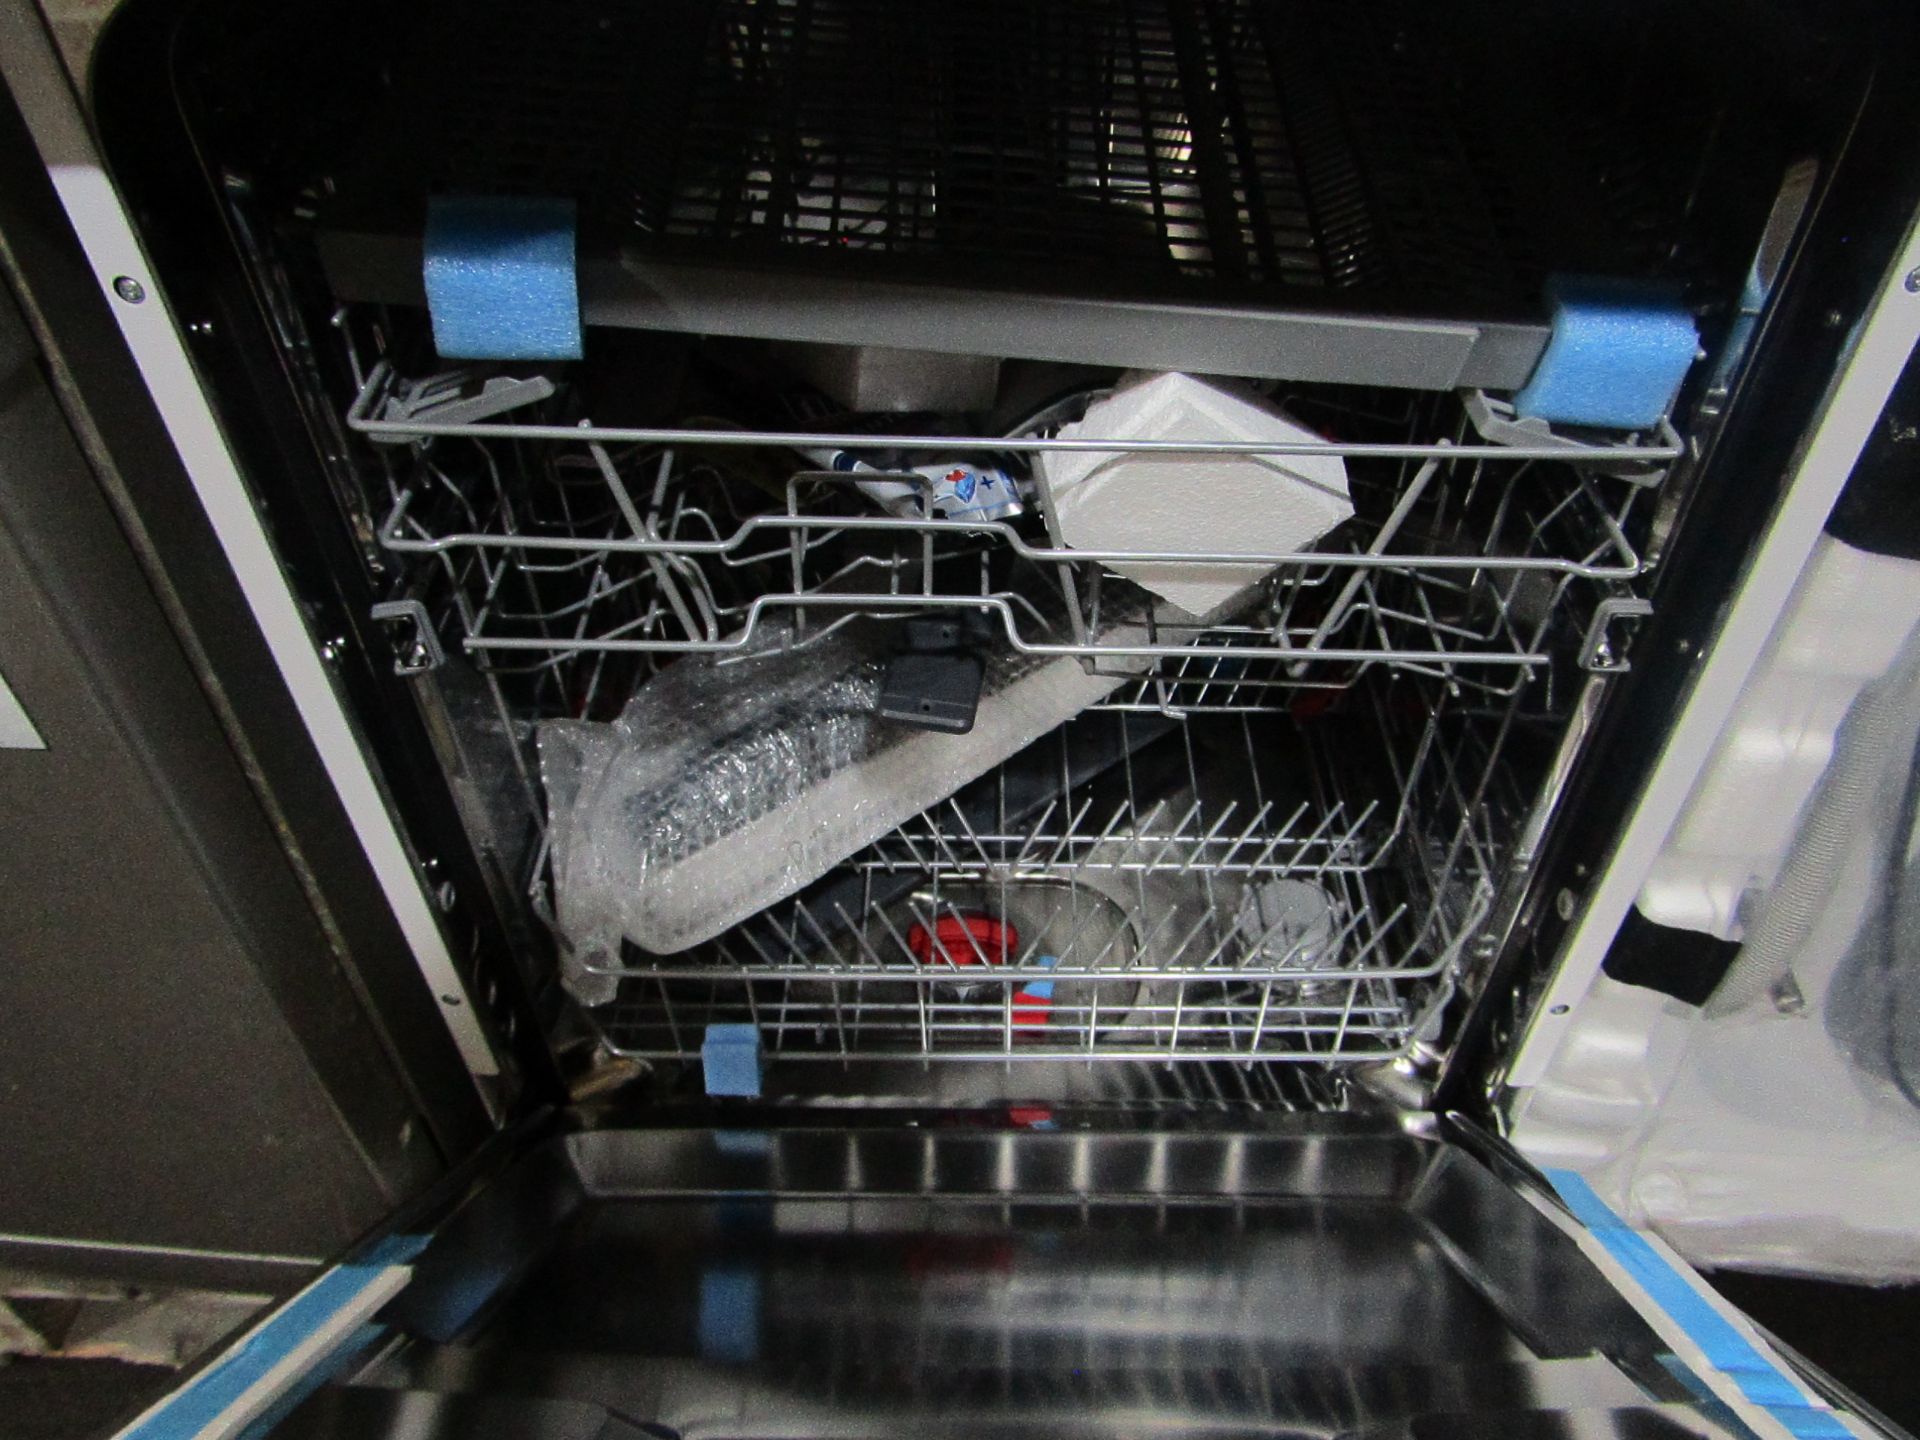 Hisense HS661C60WUK dishwasher, powers on but we cannot test any further without connecting to water - Image 2 of 2